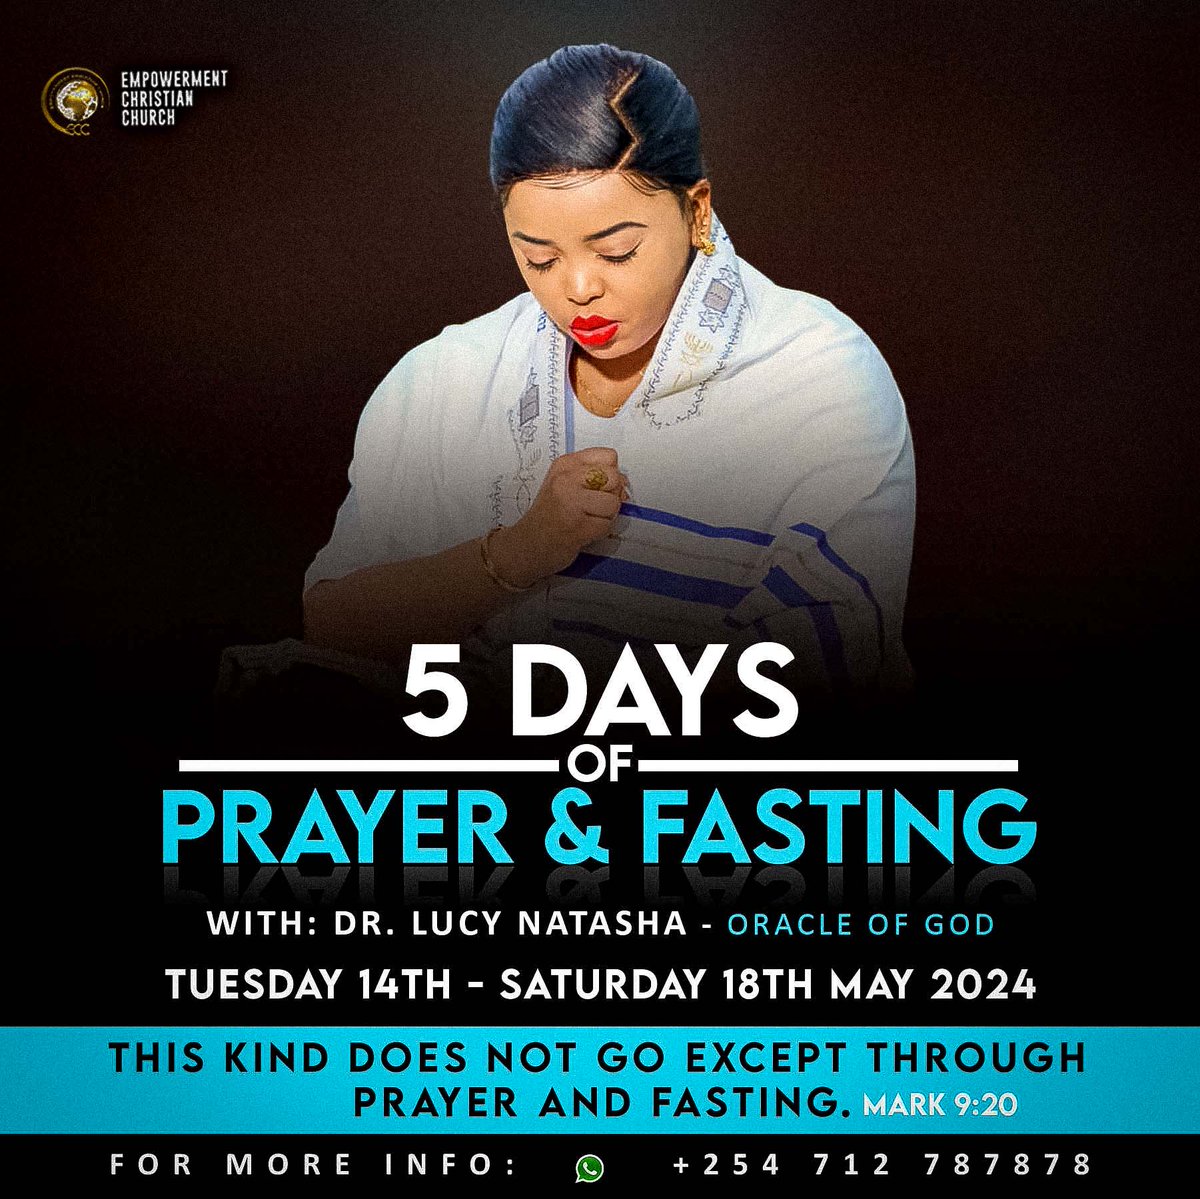 'This kind can come out only by prayer and fasting.' (Mark 9:29) I declare that this 5 Days of Prayer and Fasting will Rewrite your Story and give you total victory. Tuesday 14th - Saturday 18th May Fasting Time is 6am-6pm Daily or 6am - 3pm or 6am - 1pm.